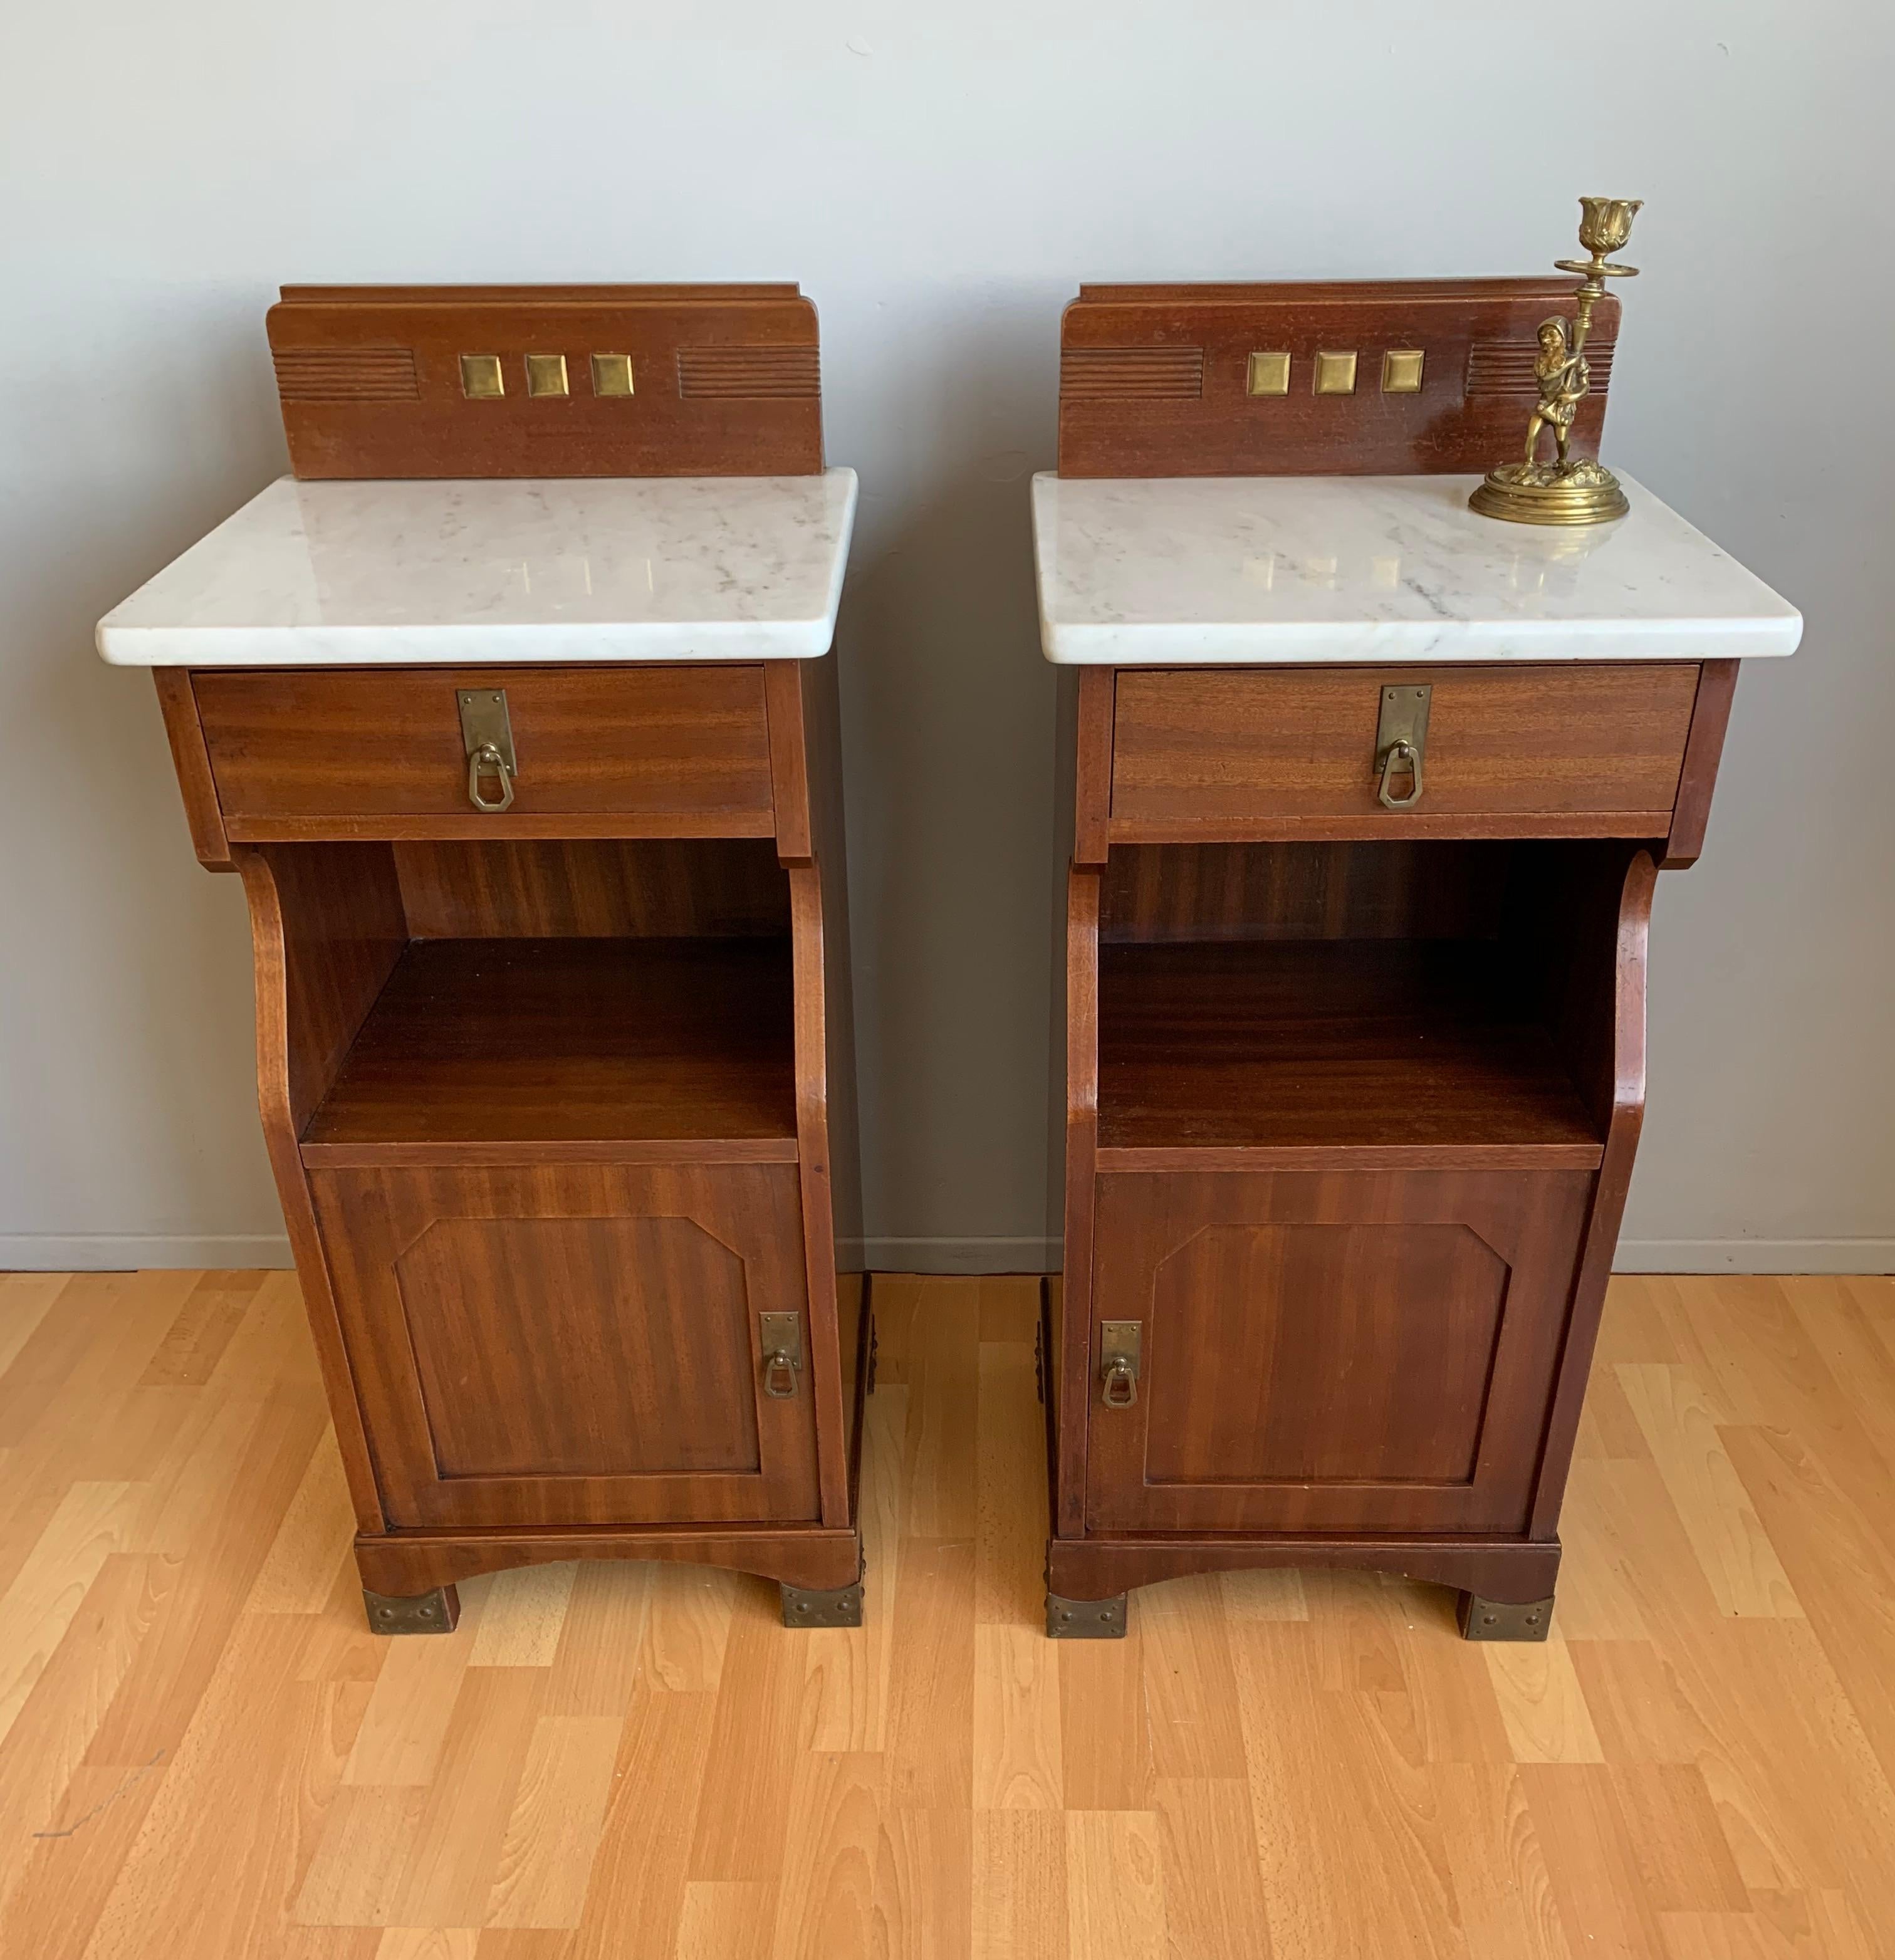 Pair of Arts and Crafts Nutwood Bedside Cabinets / Nightstands with Marble Tops For Sale 12